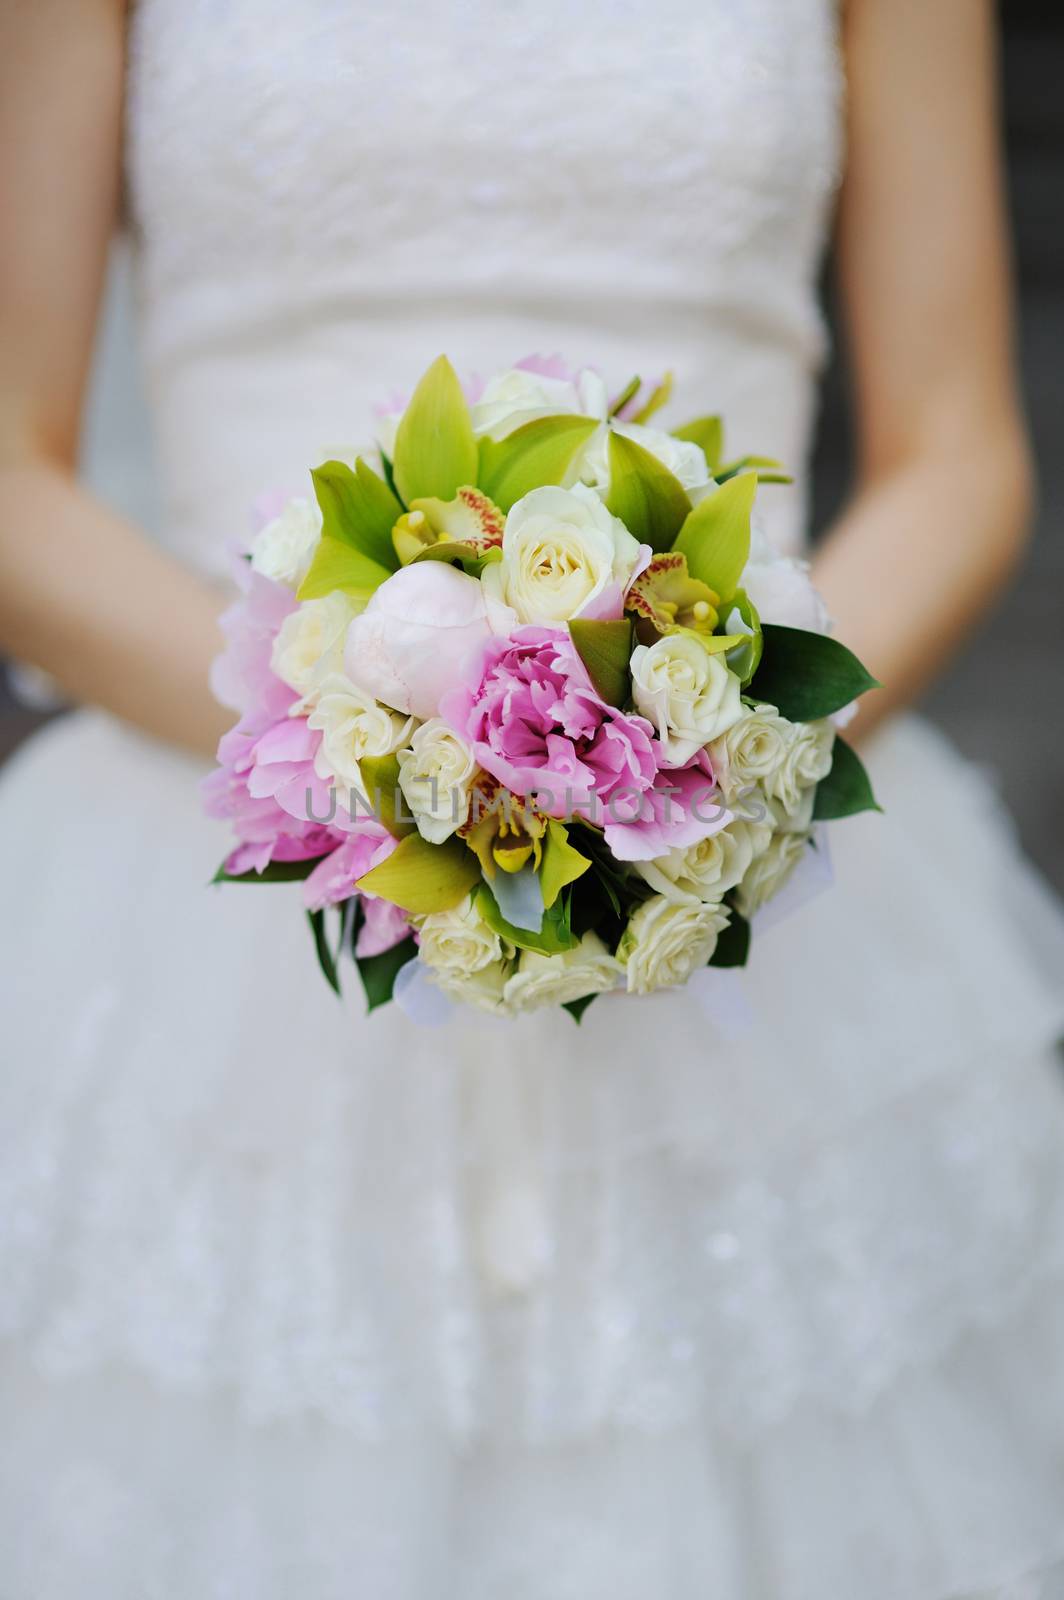 Bride holding white wedding bouquet of roses